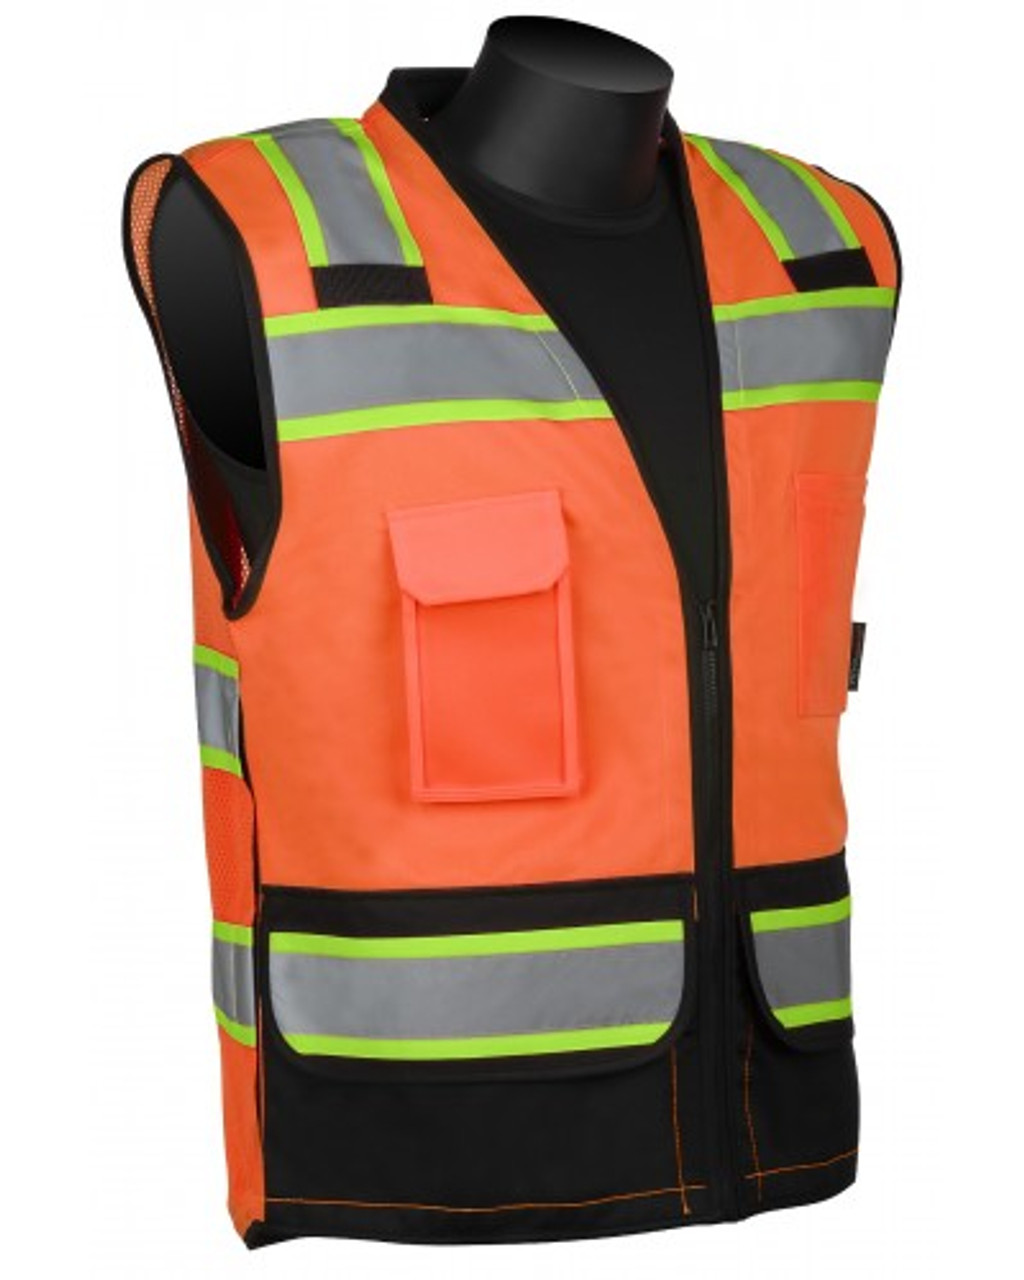 Class 2 HiVizGard™ Solid Front and Mesh Back Surveyors Vest with Black Bottom